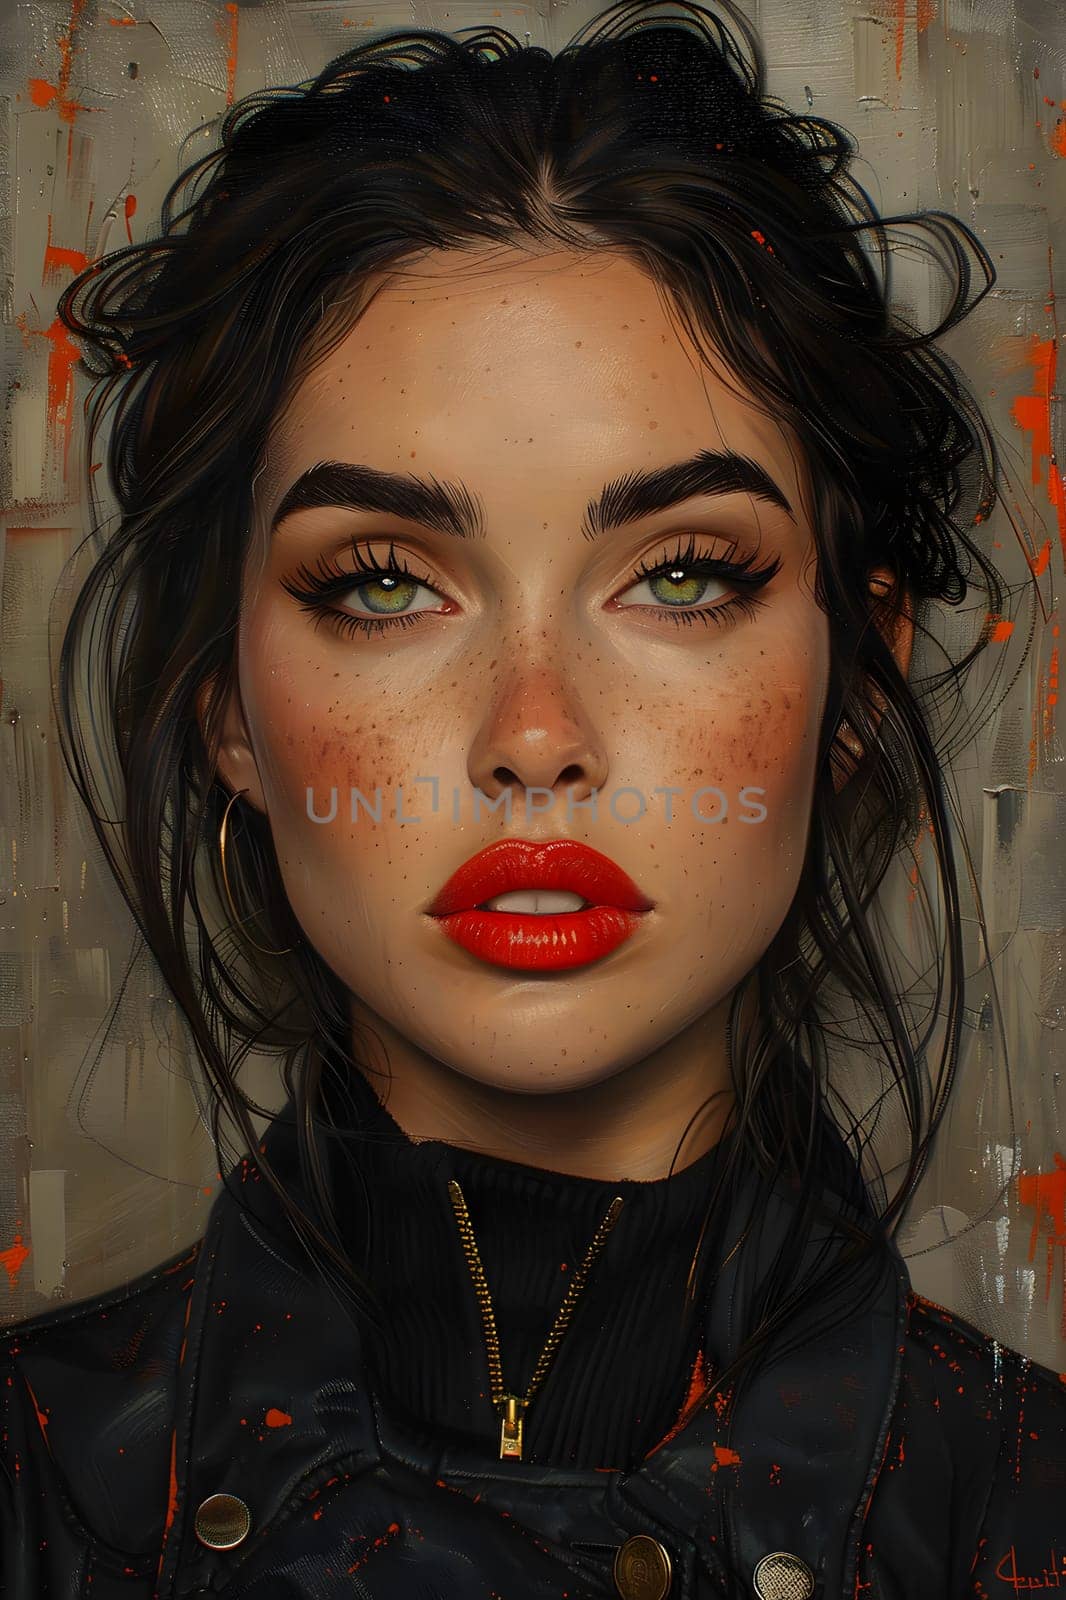 Woman in black jacket with red lipstick accentuating her lips by Nadtochiy